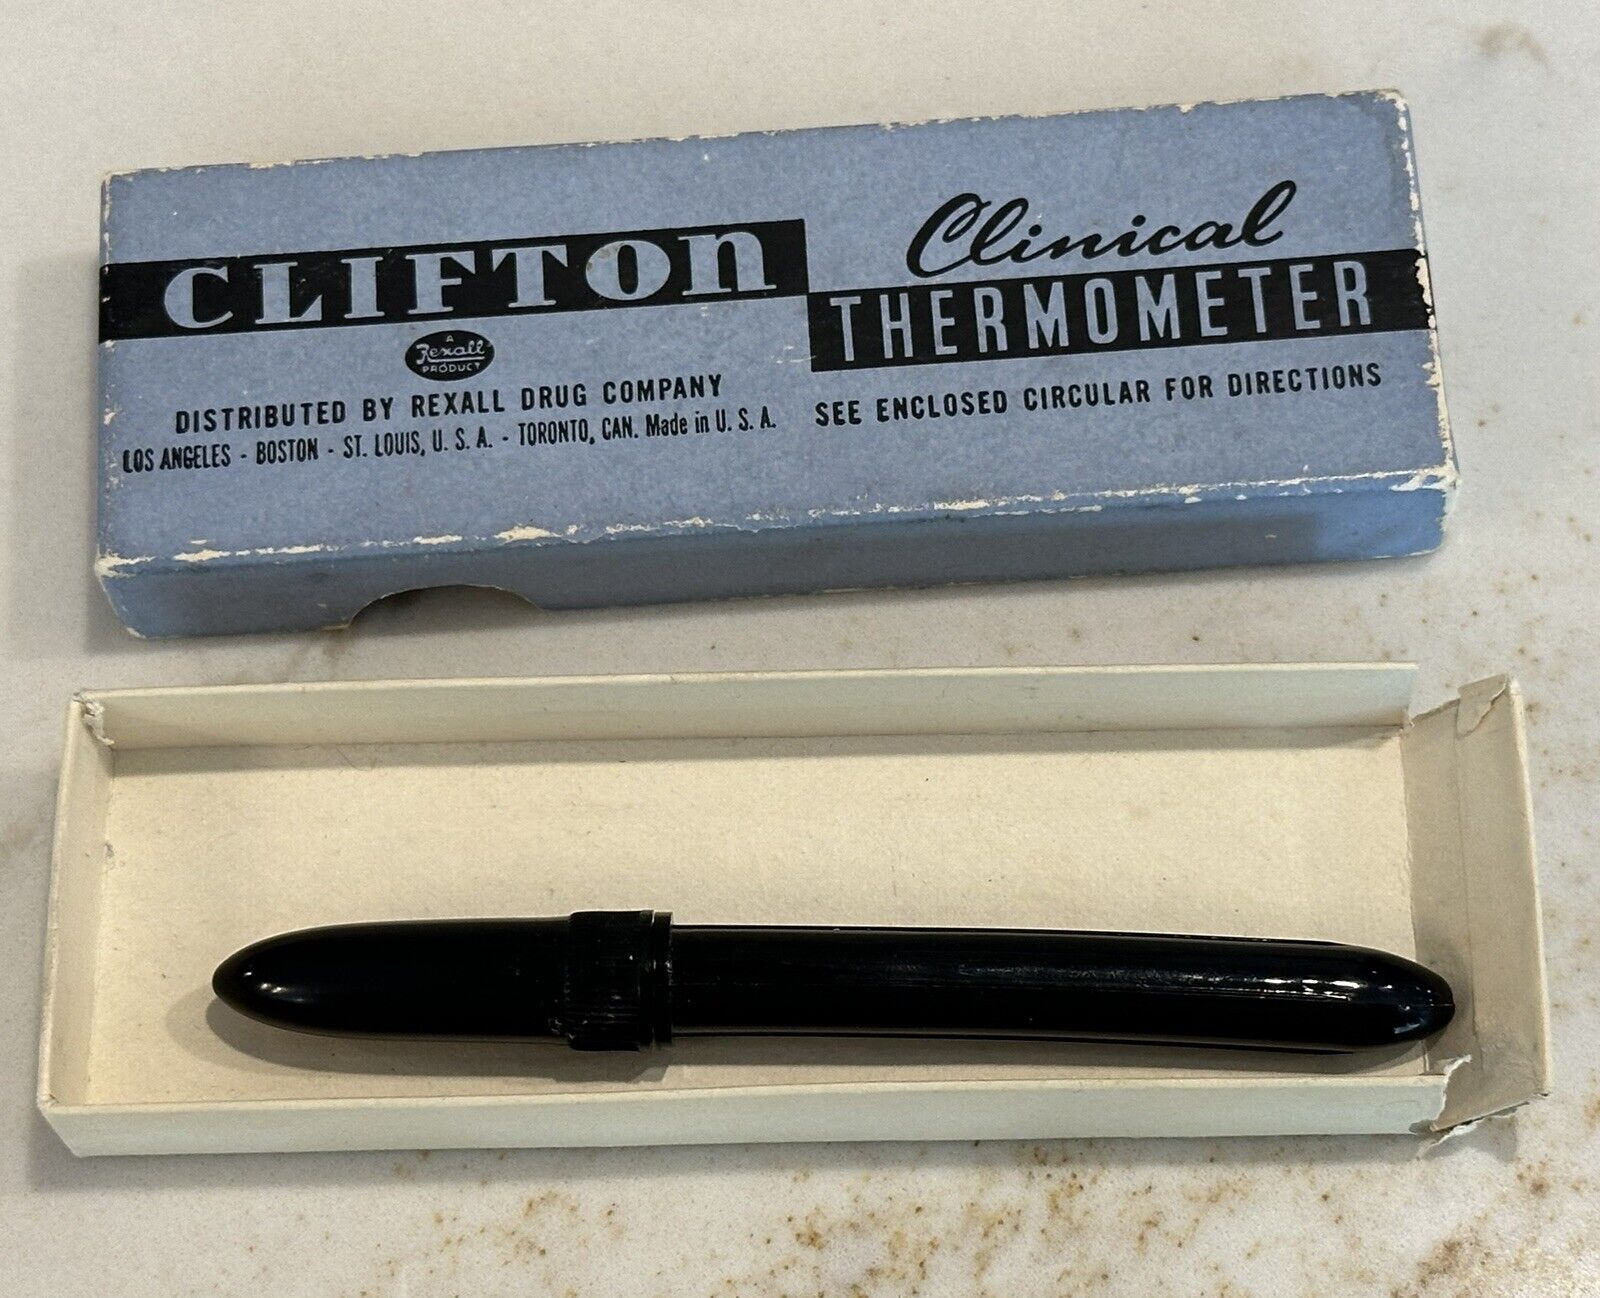 Vintage Clifton Clinical Thermometer Rexall Drug Company Original Box And Case